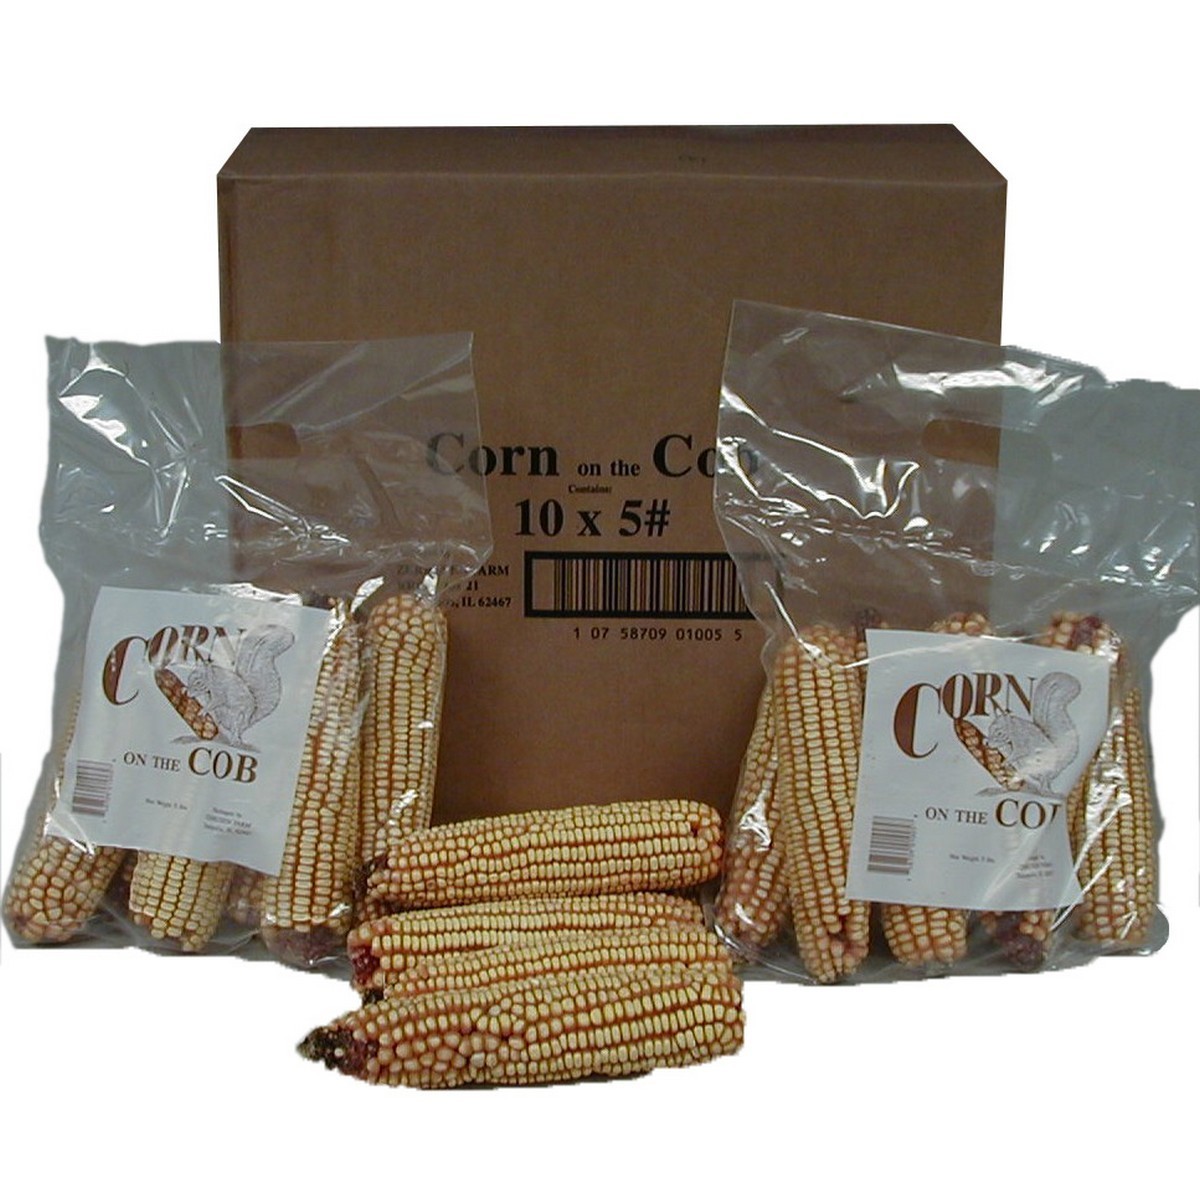 Picture of Zerrusen Farm 65950 5 lbs Corn on The Cob Corn Squirrel Food - Master Pack 10